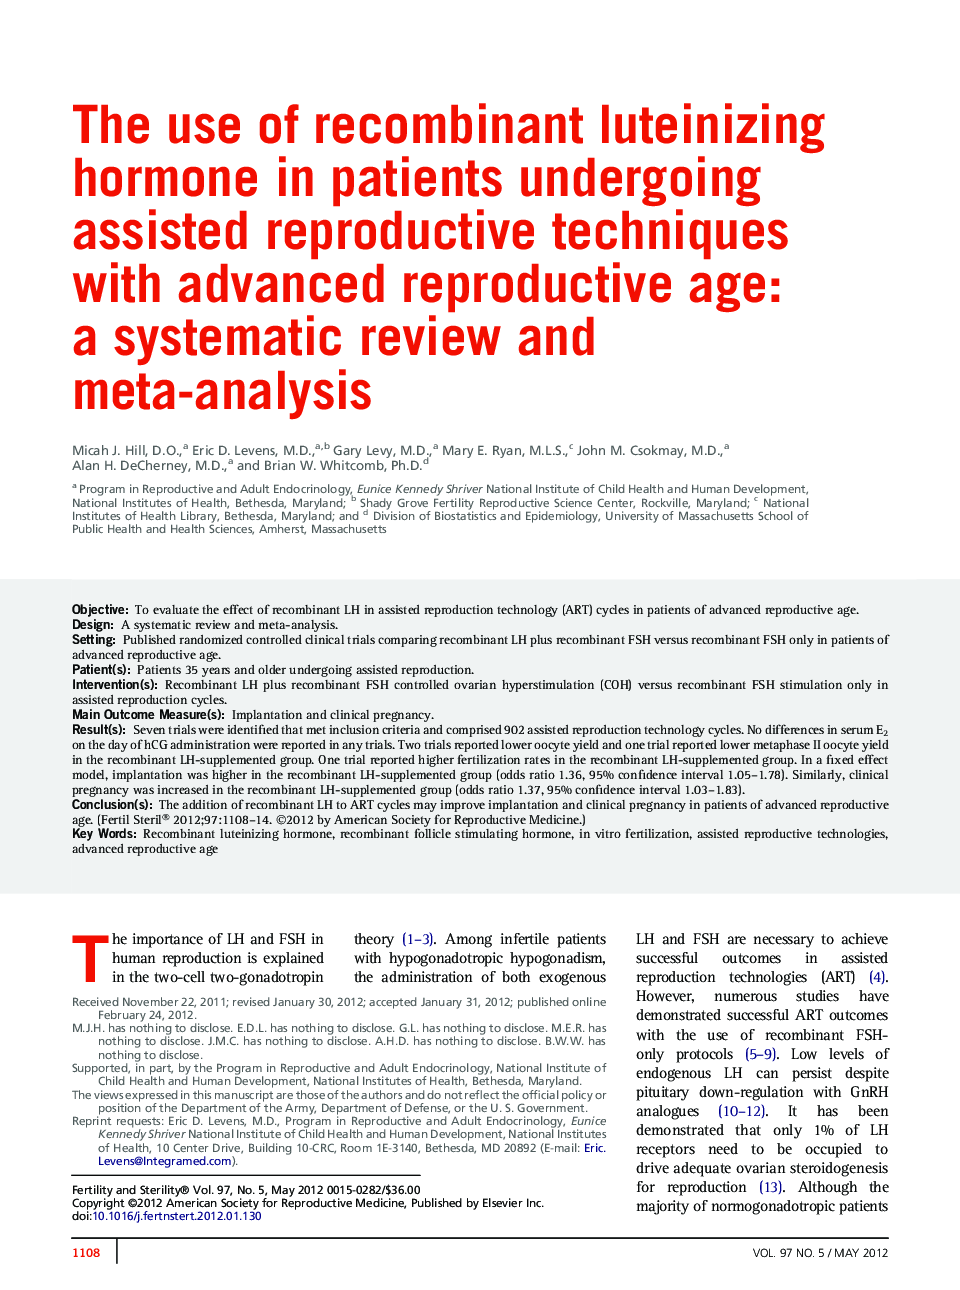 The use of recombinant luteinizing hormone in patients undergoing assisted reproductive techniques with advanced reproductive age: a systematic review and meta-analysis